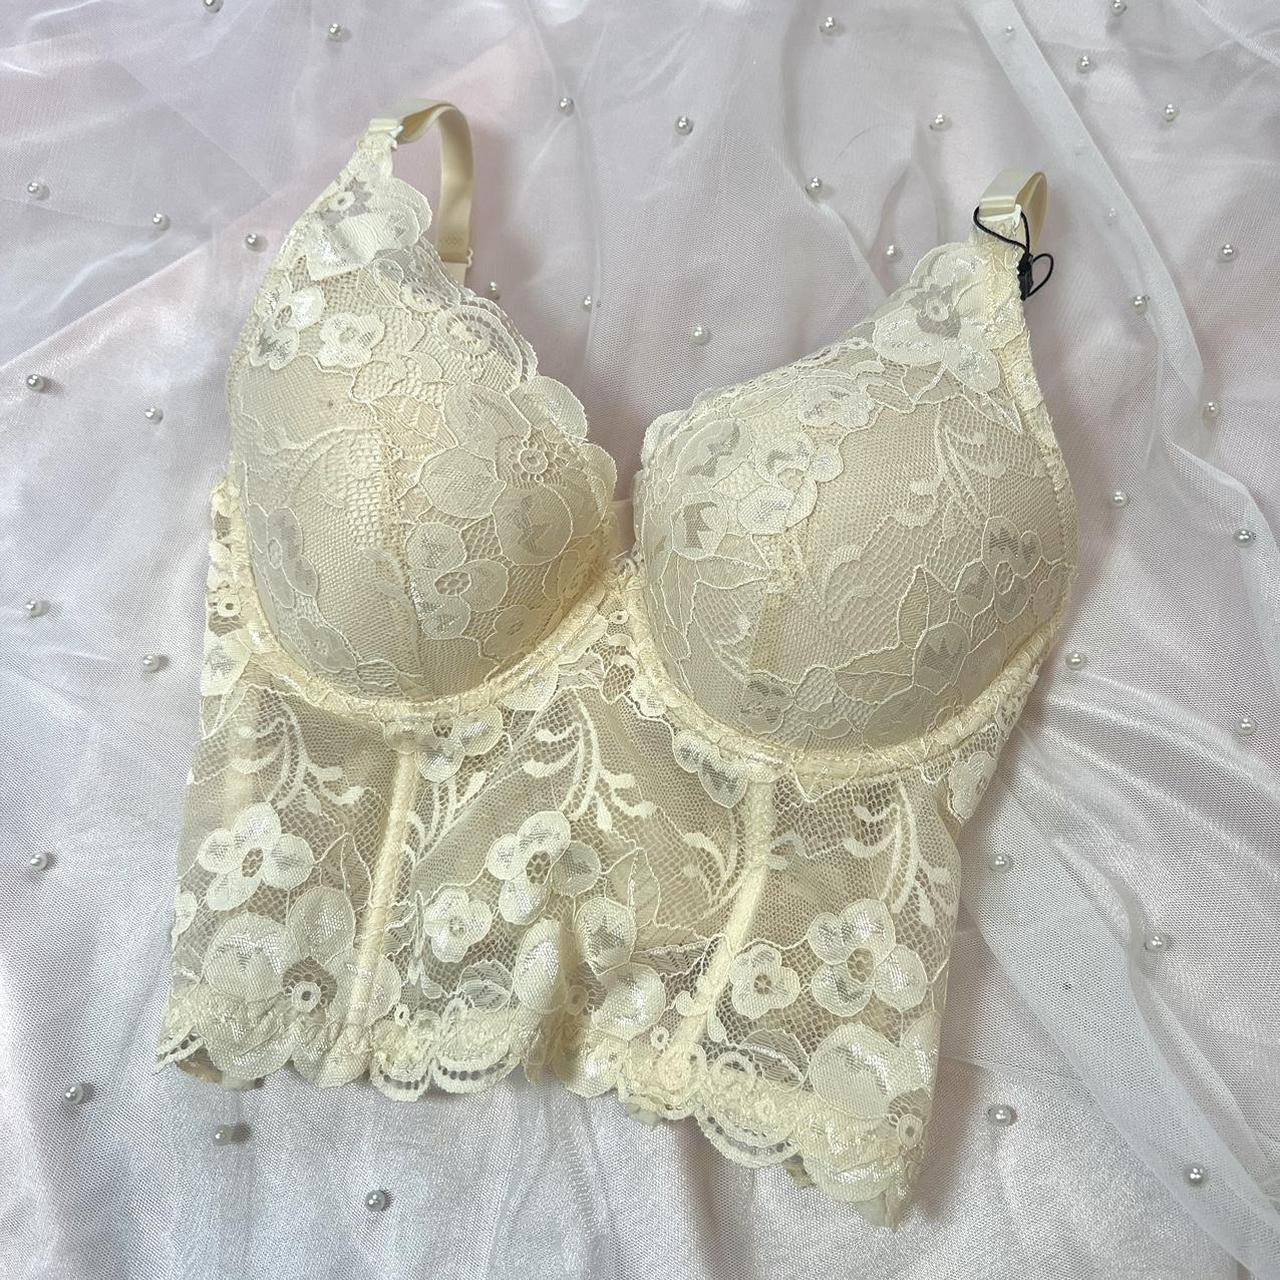 Nude corset bra with boning has a little lace in - Depop